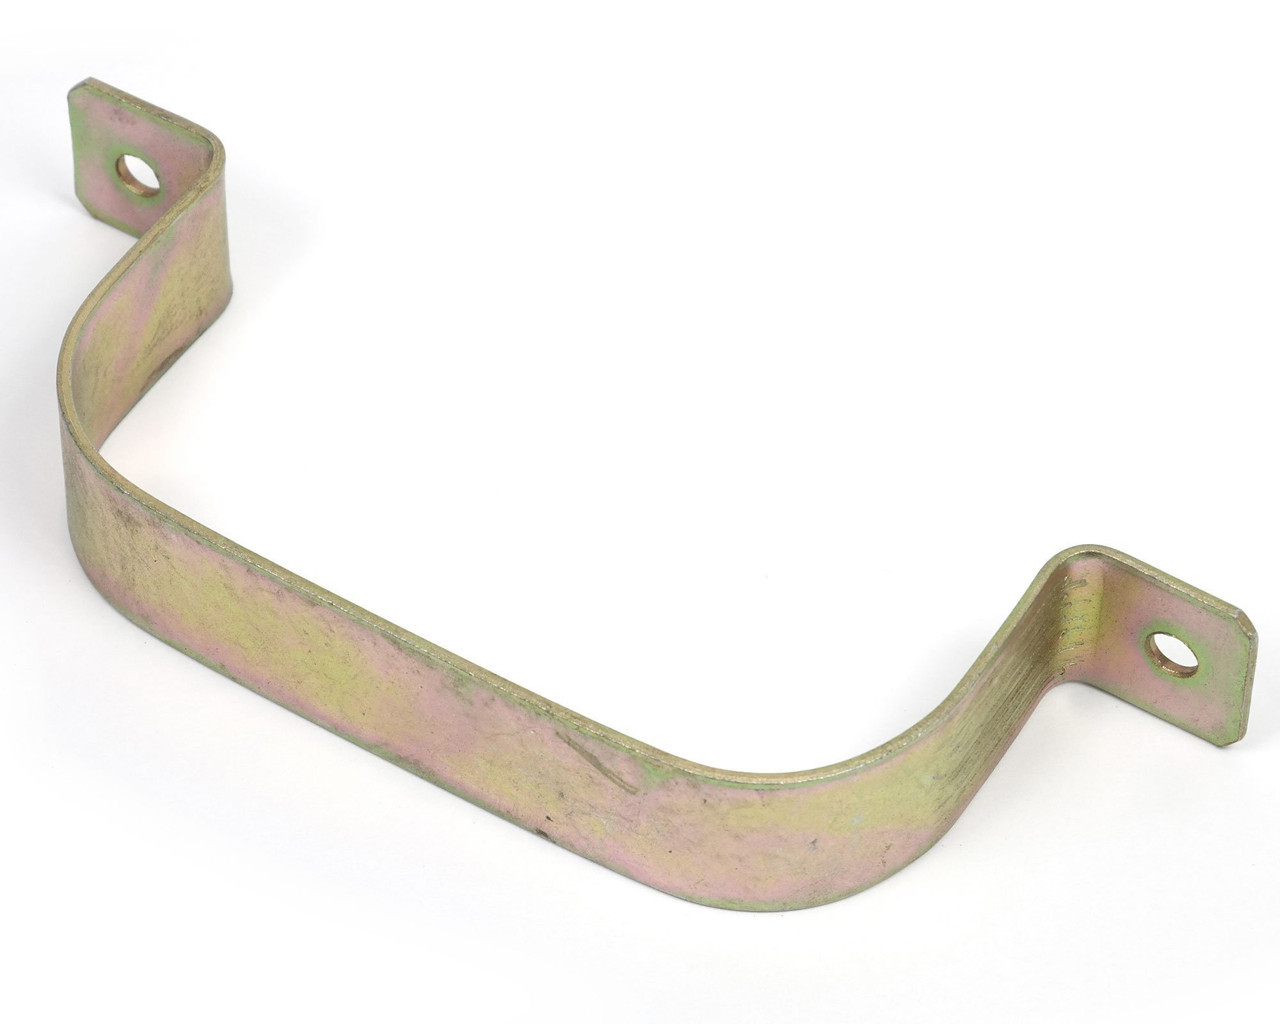 Charcoal canister mounting bracket - NOS
FIAT Spider 2000 and Pininfarina - 1980-1985 (with Bosch fuel injection)
- Auto Ricambi
FI0-277, 4413196